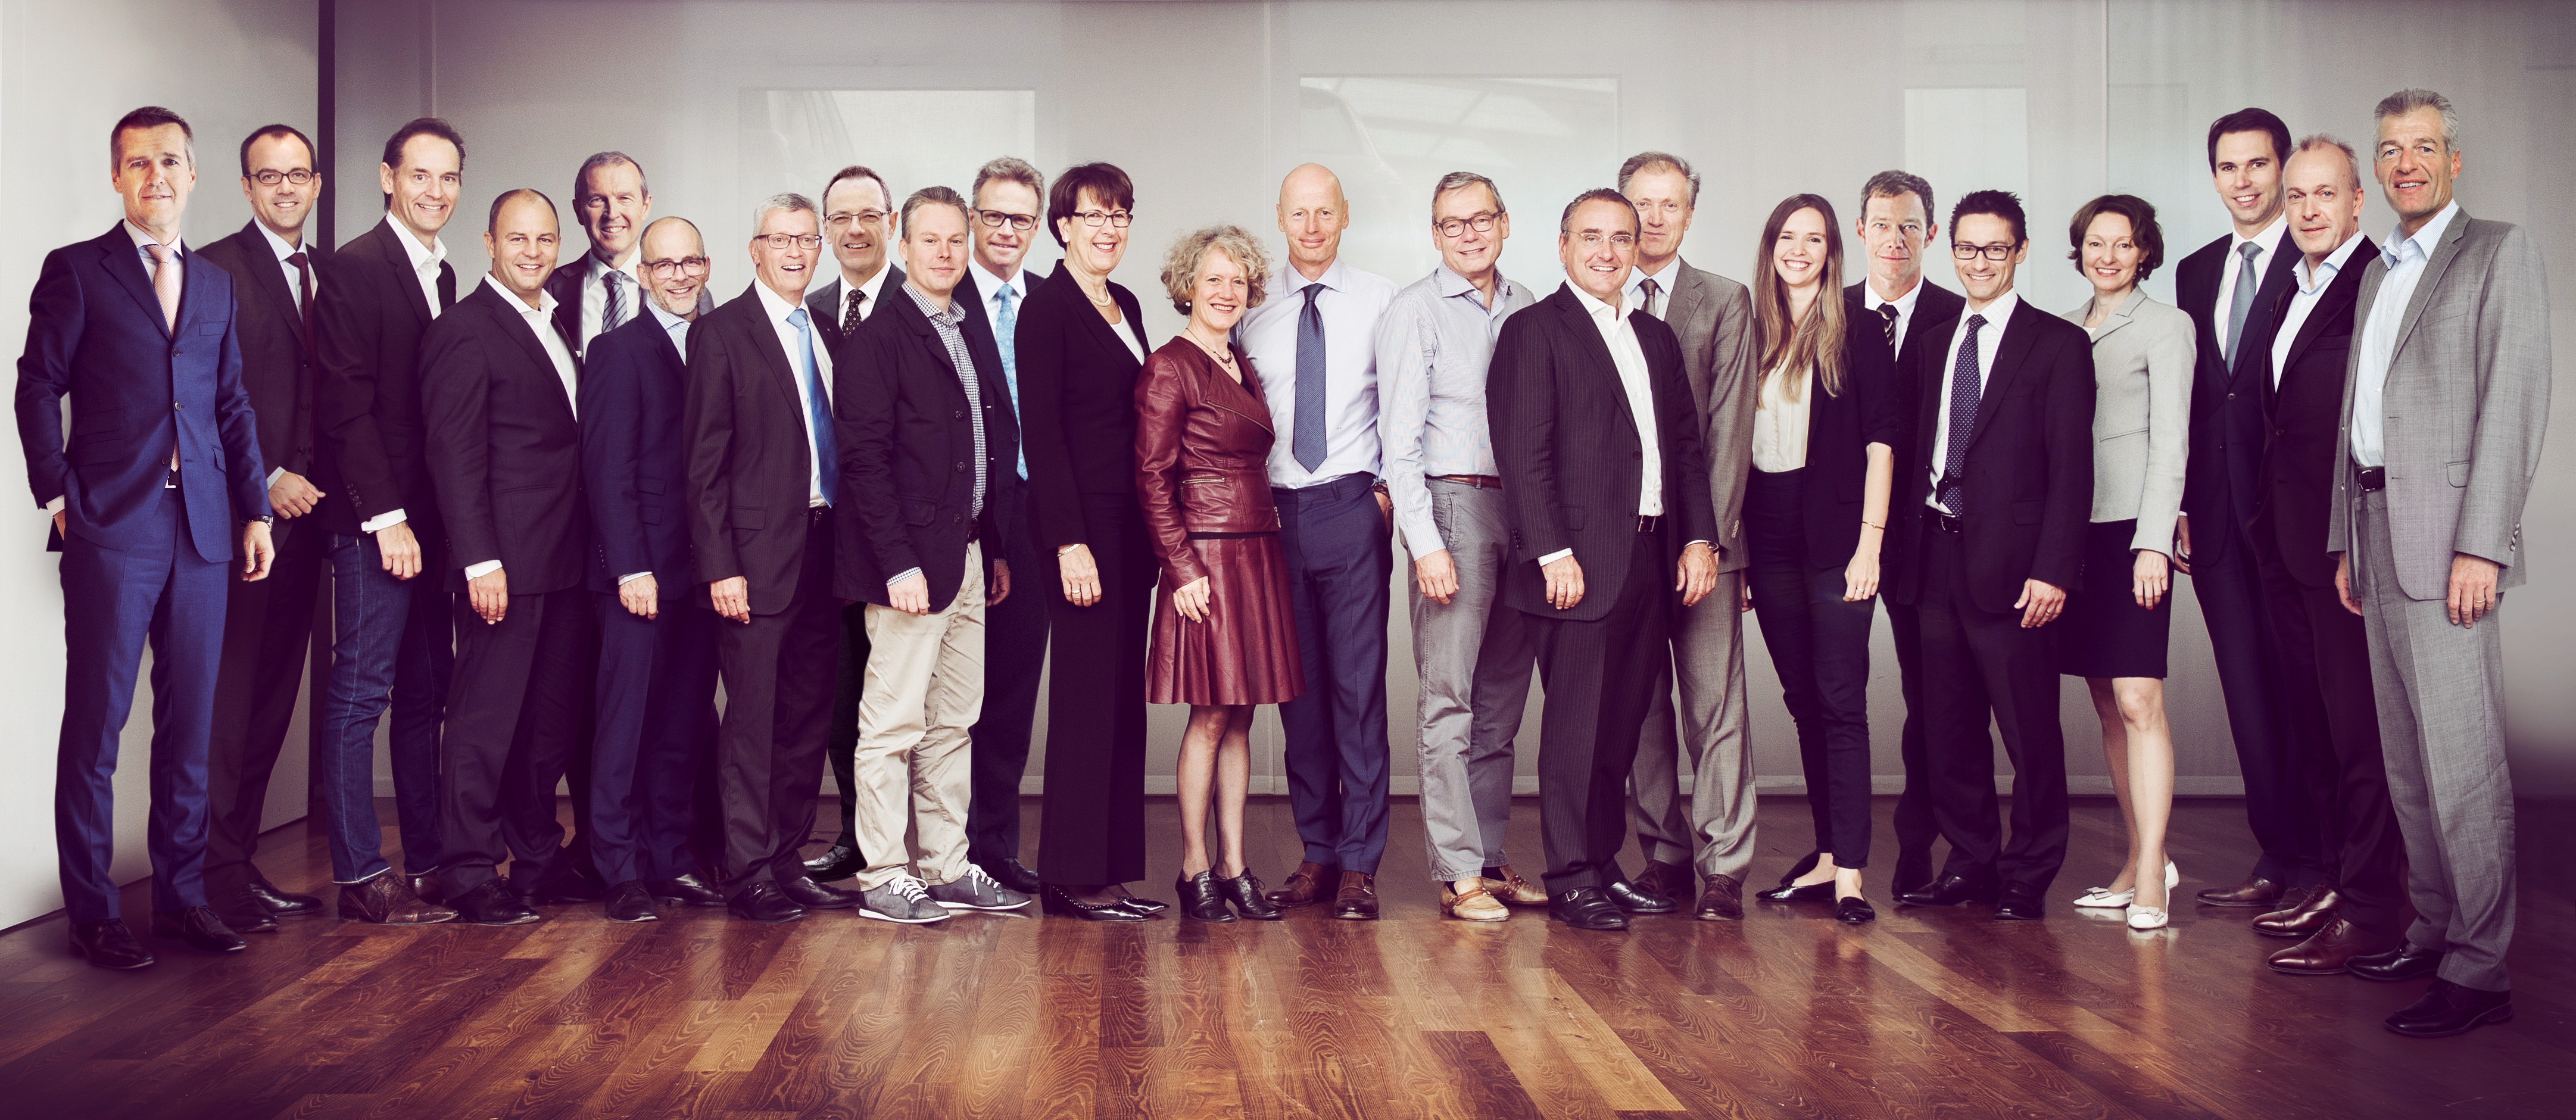 DigitalZurich2025 has been officially launched